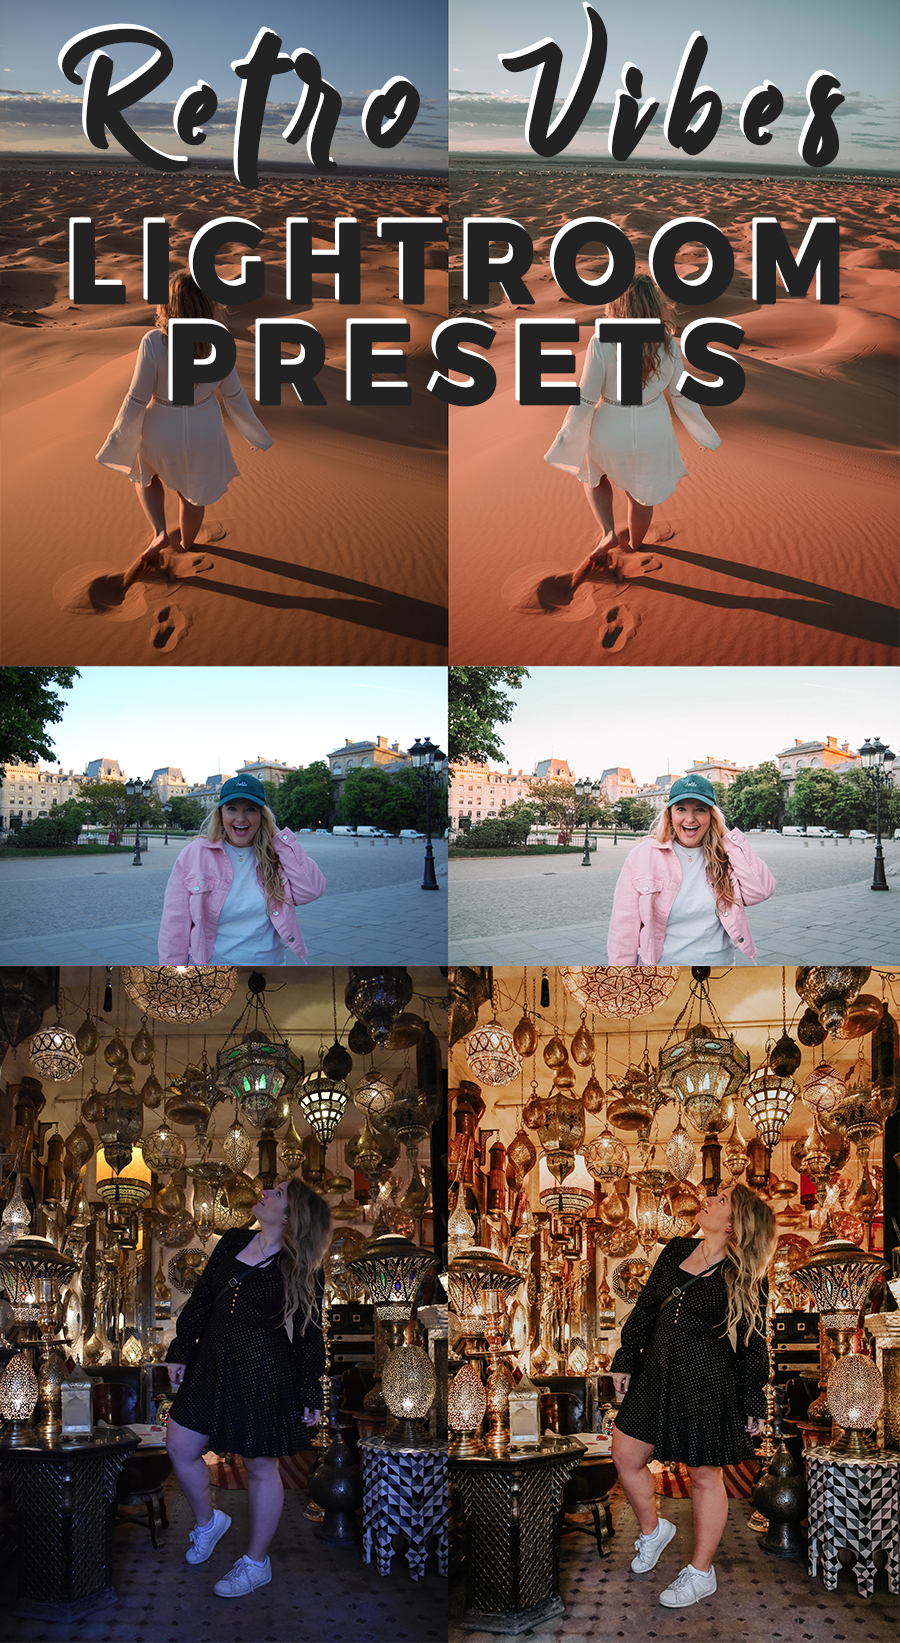 How to Use Lightroom Presets on Your Mobile (FREE!) Plus ... - 900 x 1643 jpeg 1472kB